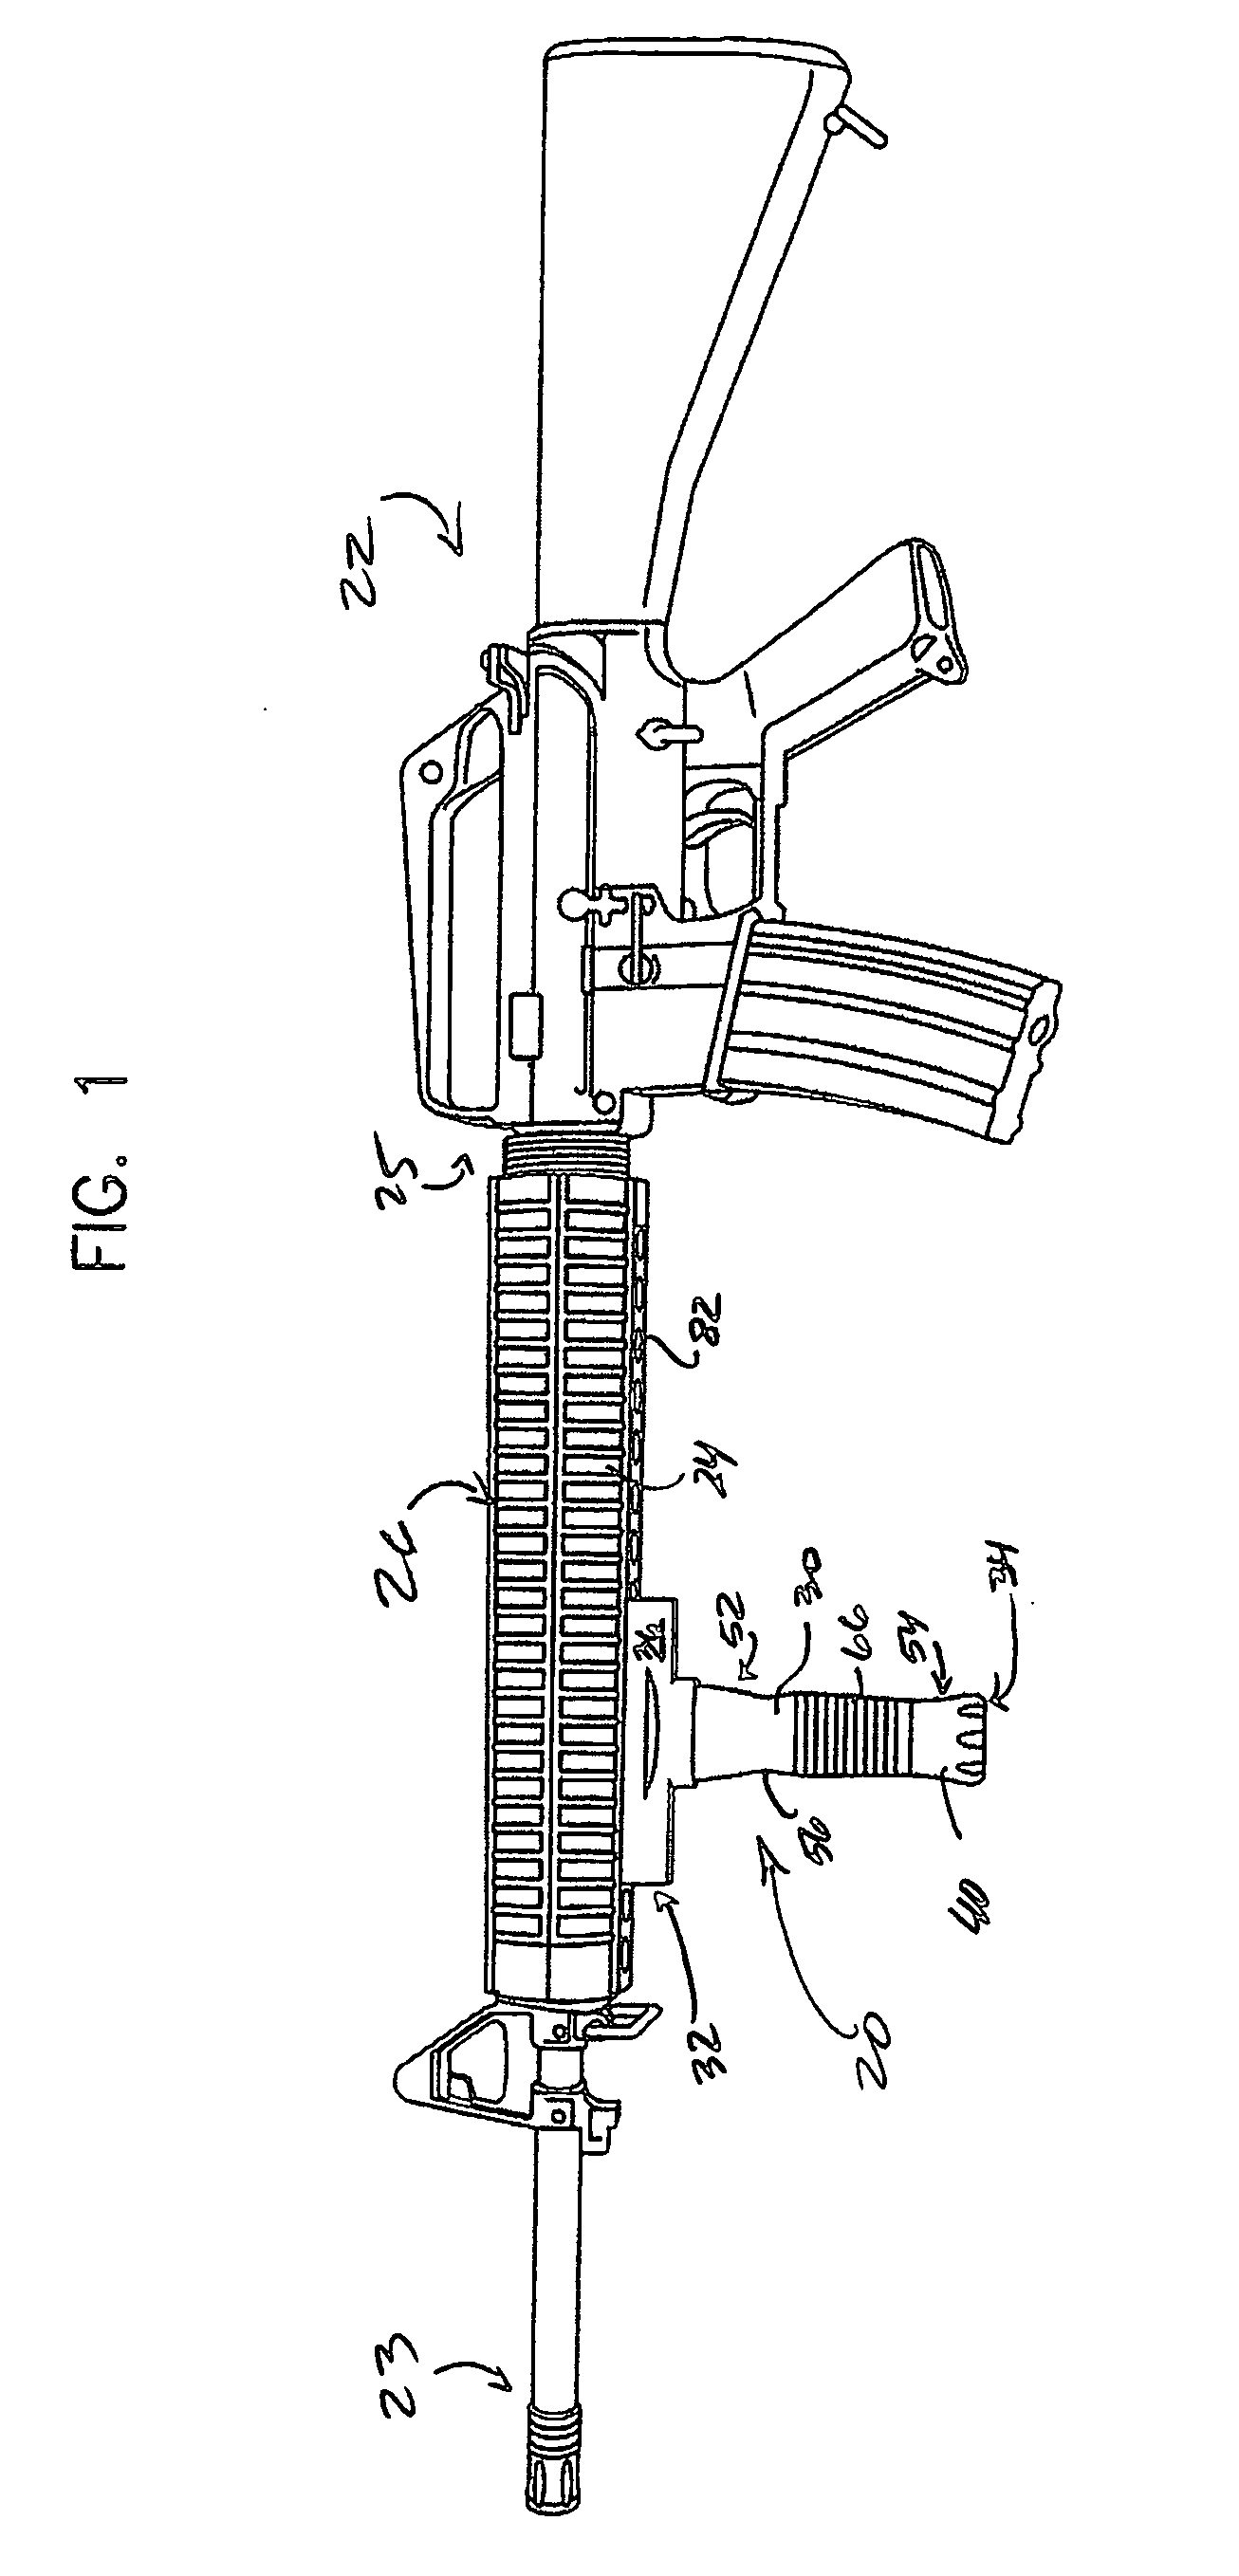 Forend grip assembly for receipt upon an unaltered host weapon